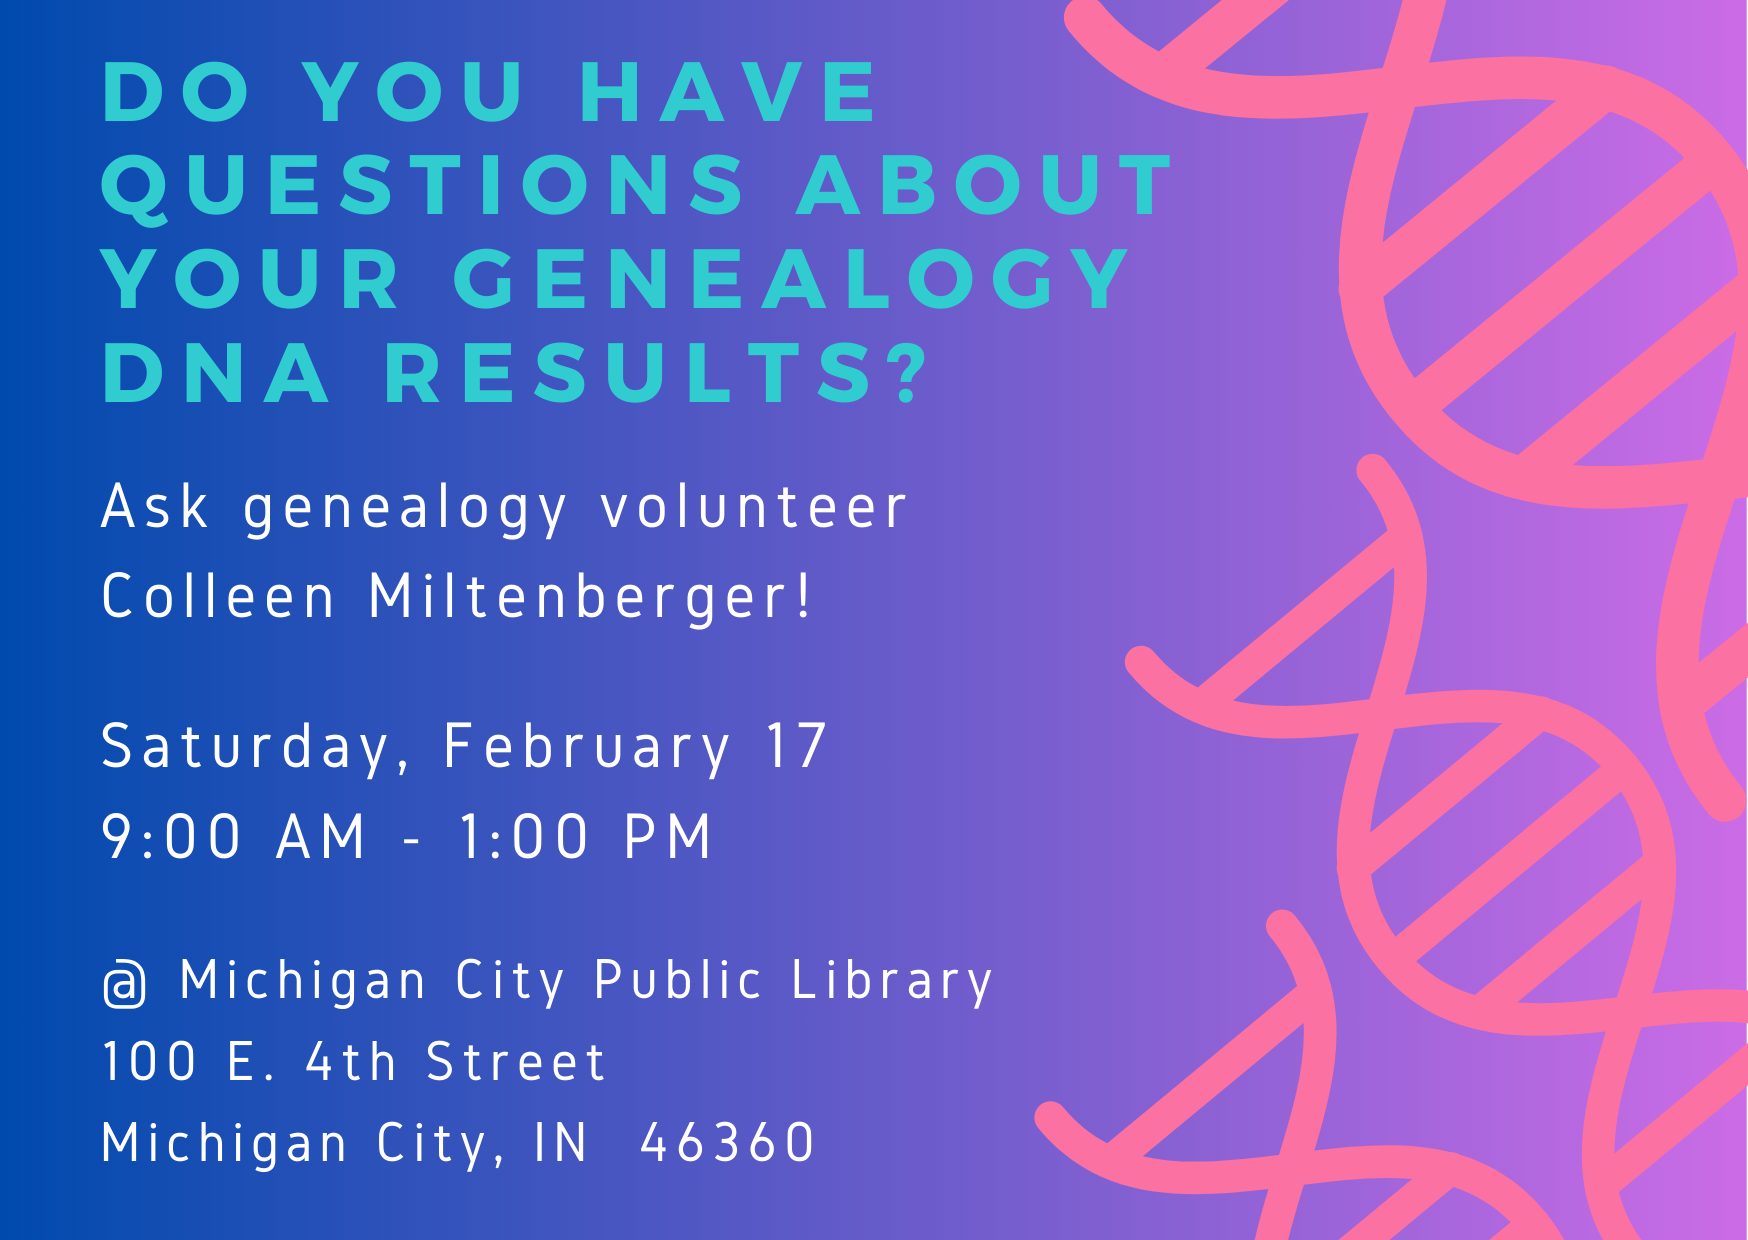 Do you have questions about your genealogy DNA results? Ask genealogy volunteer Colleen Miltenberger. Saturday, February 17, 9 am - 1 pm. at Michigan City Public Library